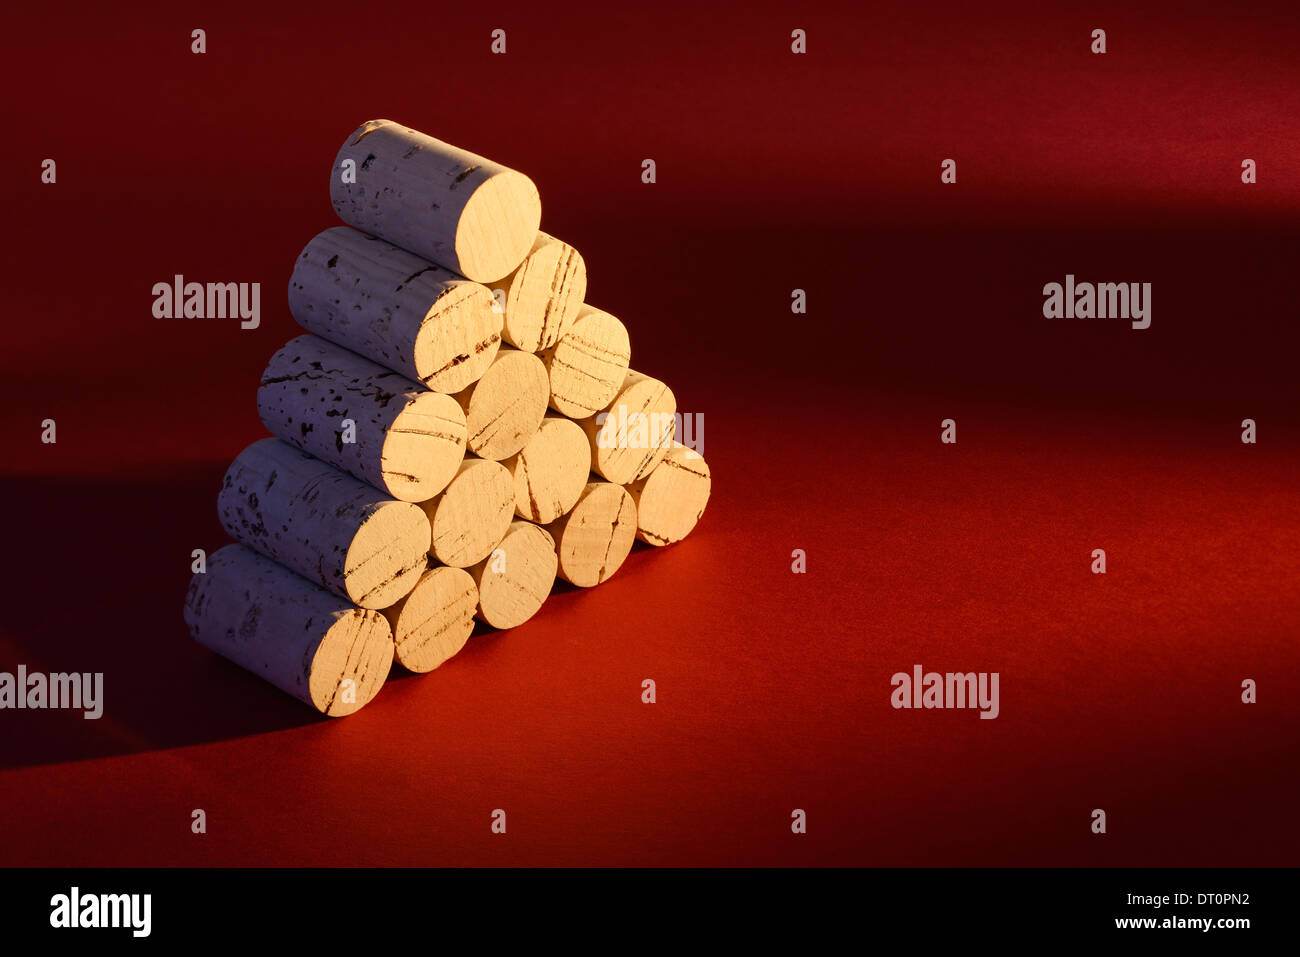 Pyramid stack of clean new wine corks Stock Photo